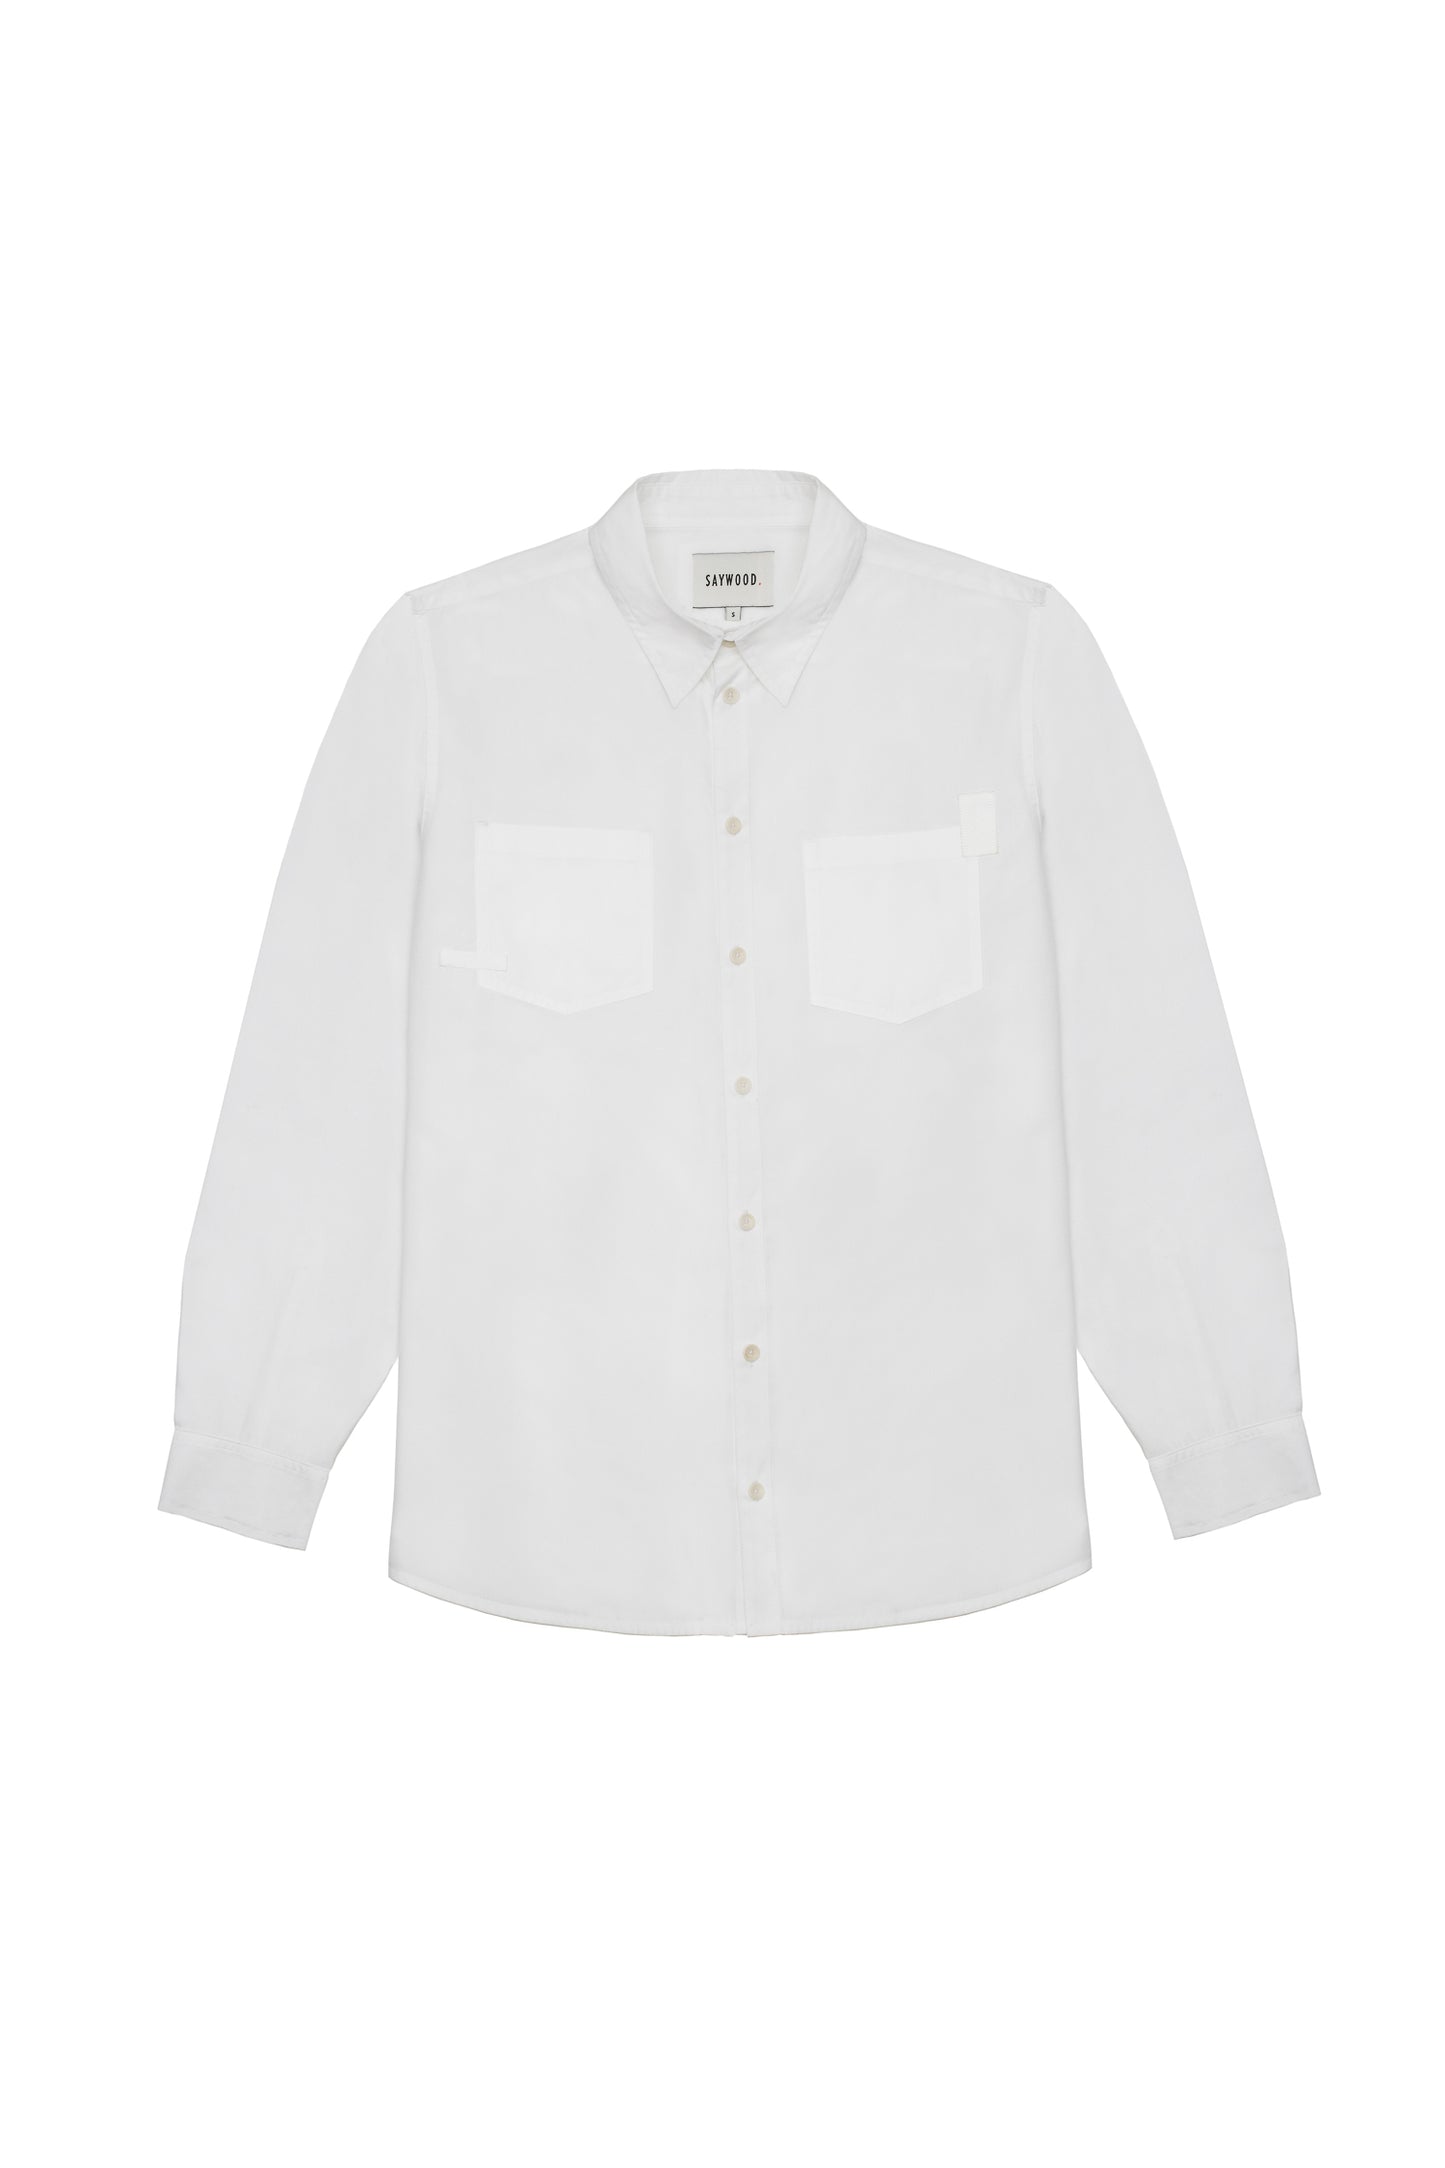 Product shot of Saywood's Eddy mens white shirt with patch pockets